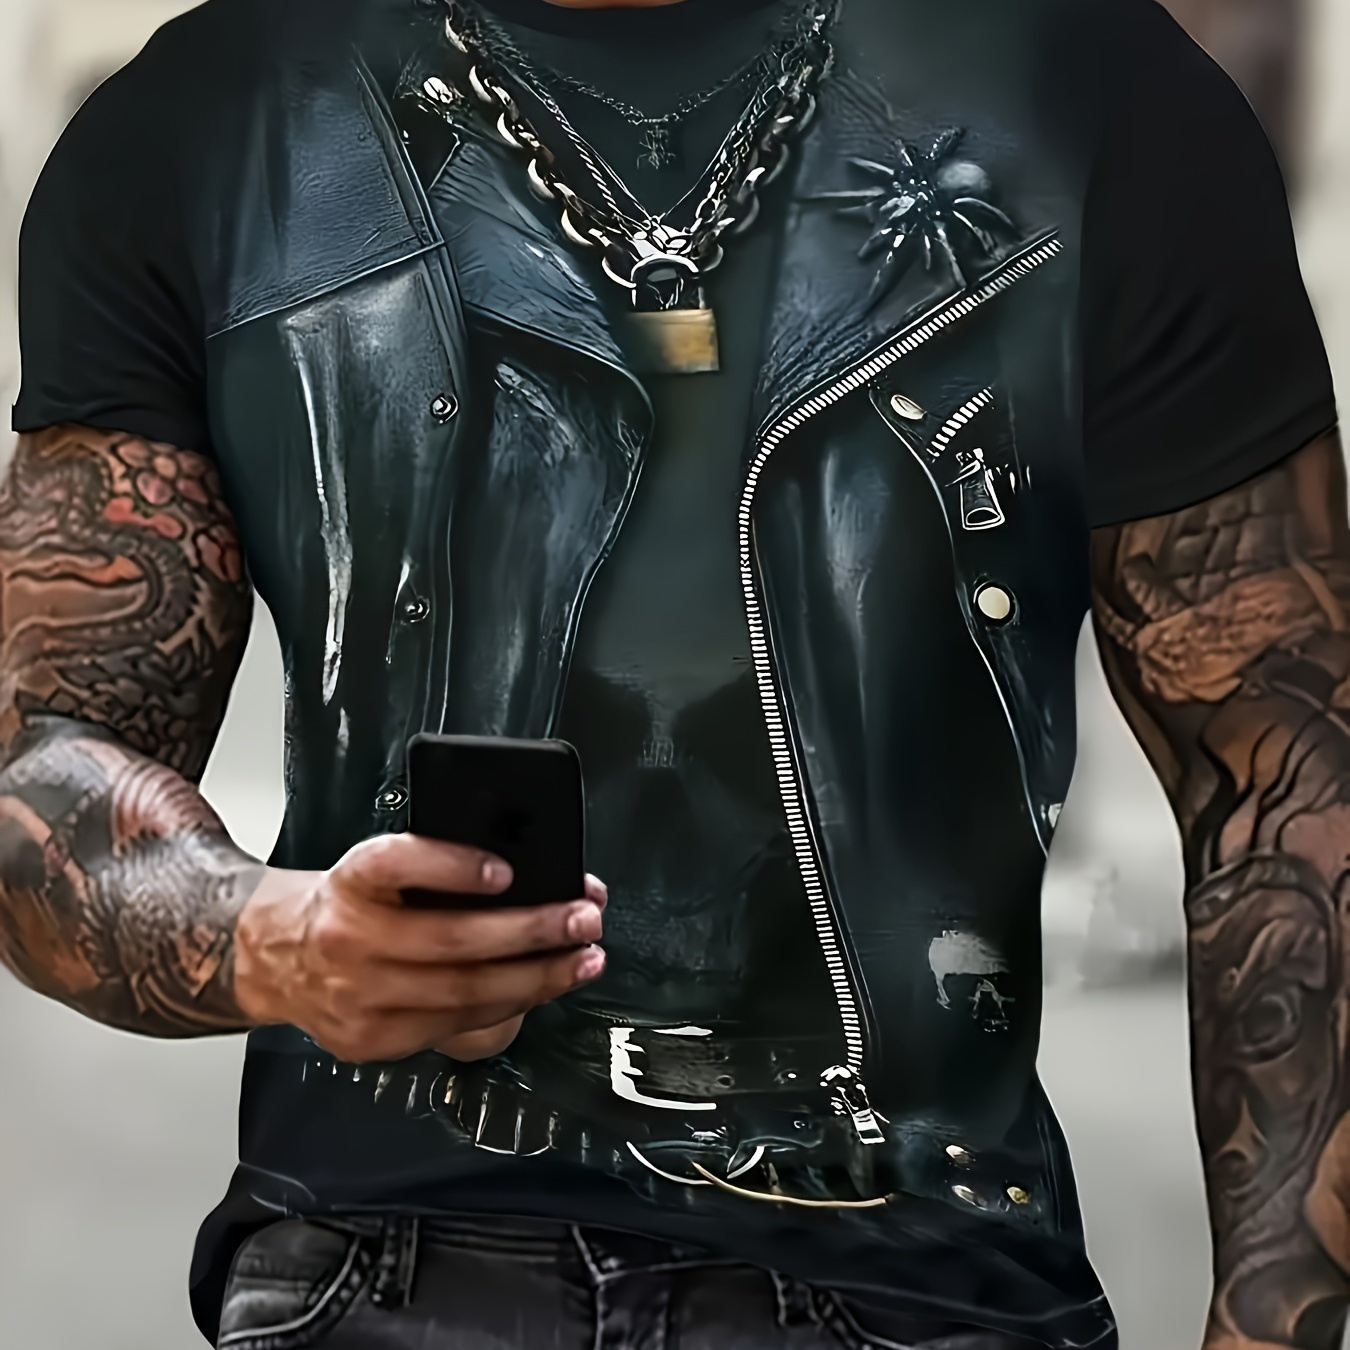 

3d Digital Motorcycle Leather Vest Like Graphic And Skeleton Skull Pattern Crew Neck And Short Sleeve T-shirt, Novel And Stylish Tops For Men's Summer Outdoors Activities And Party Wear